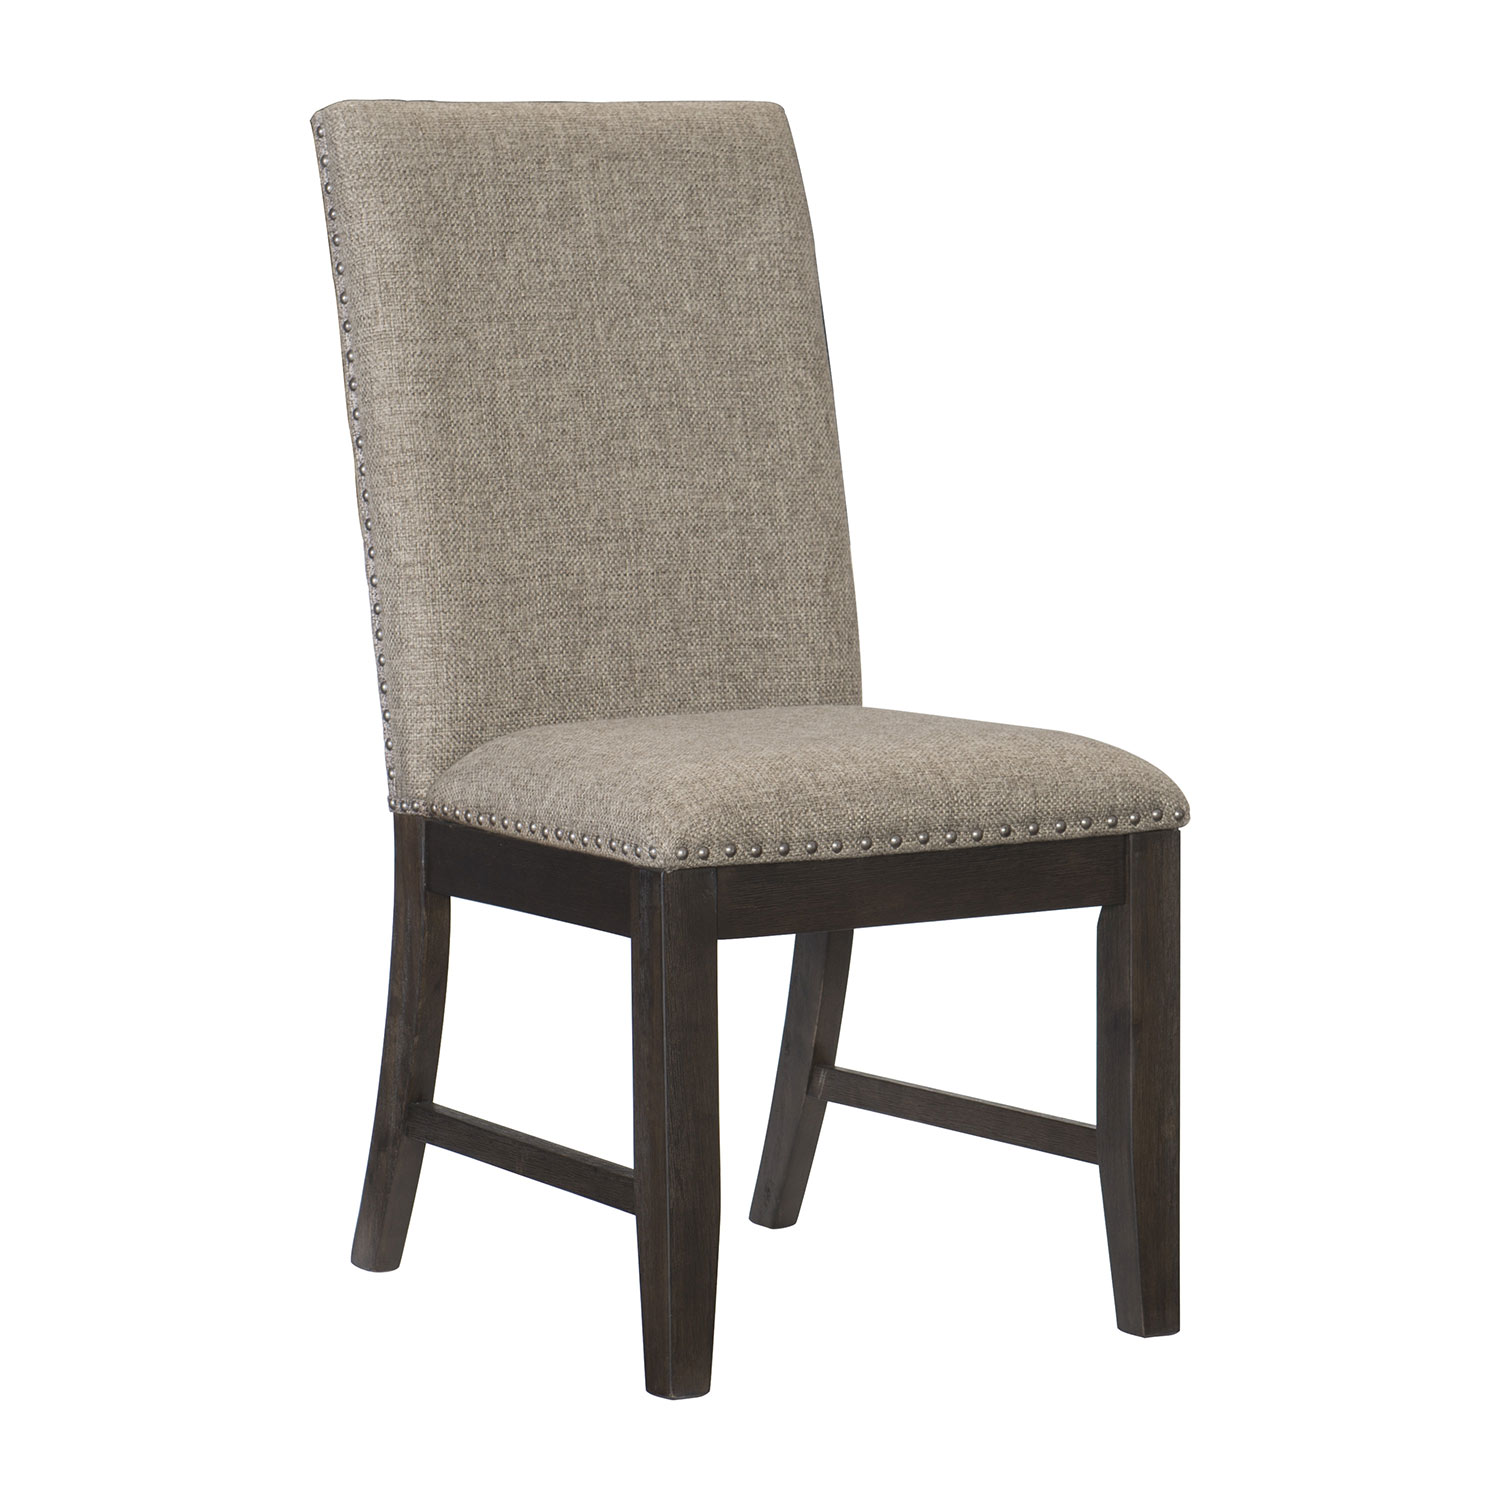 Homelegance Southlake Side Chair - Wire-brushed Rustic Brown